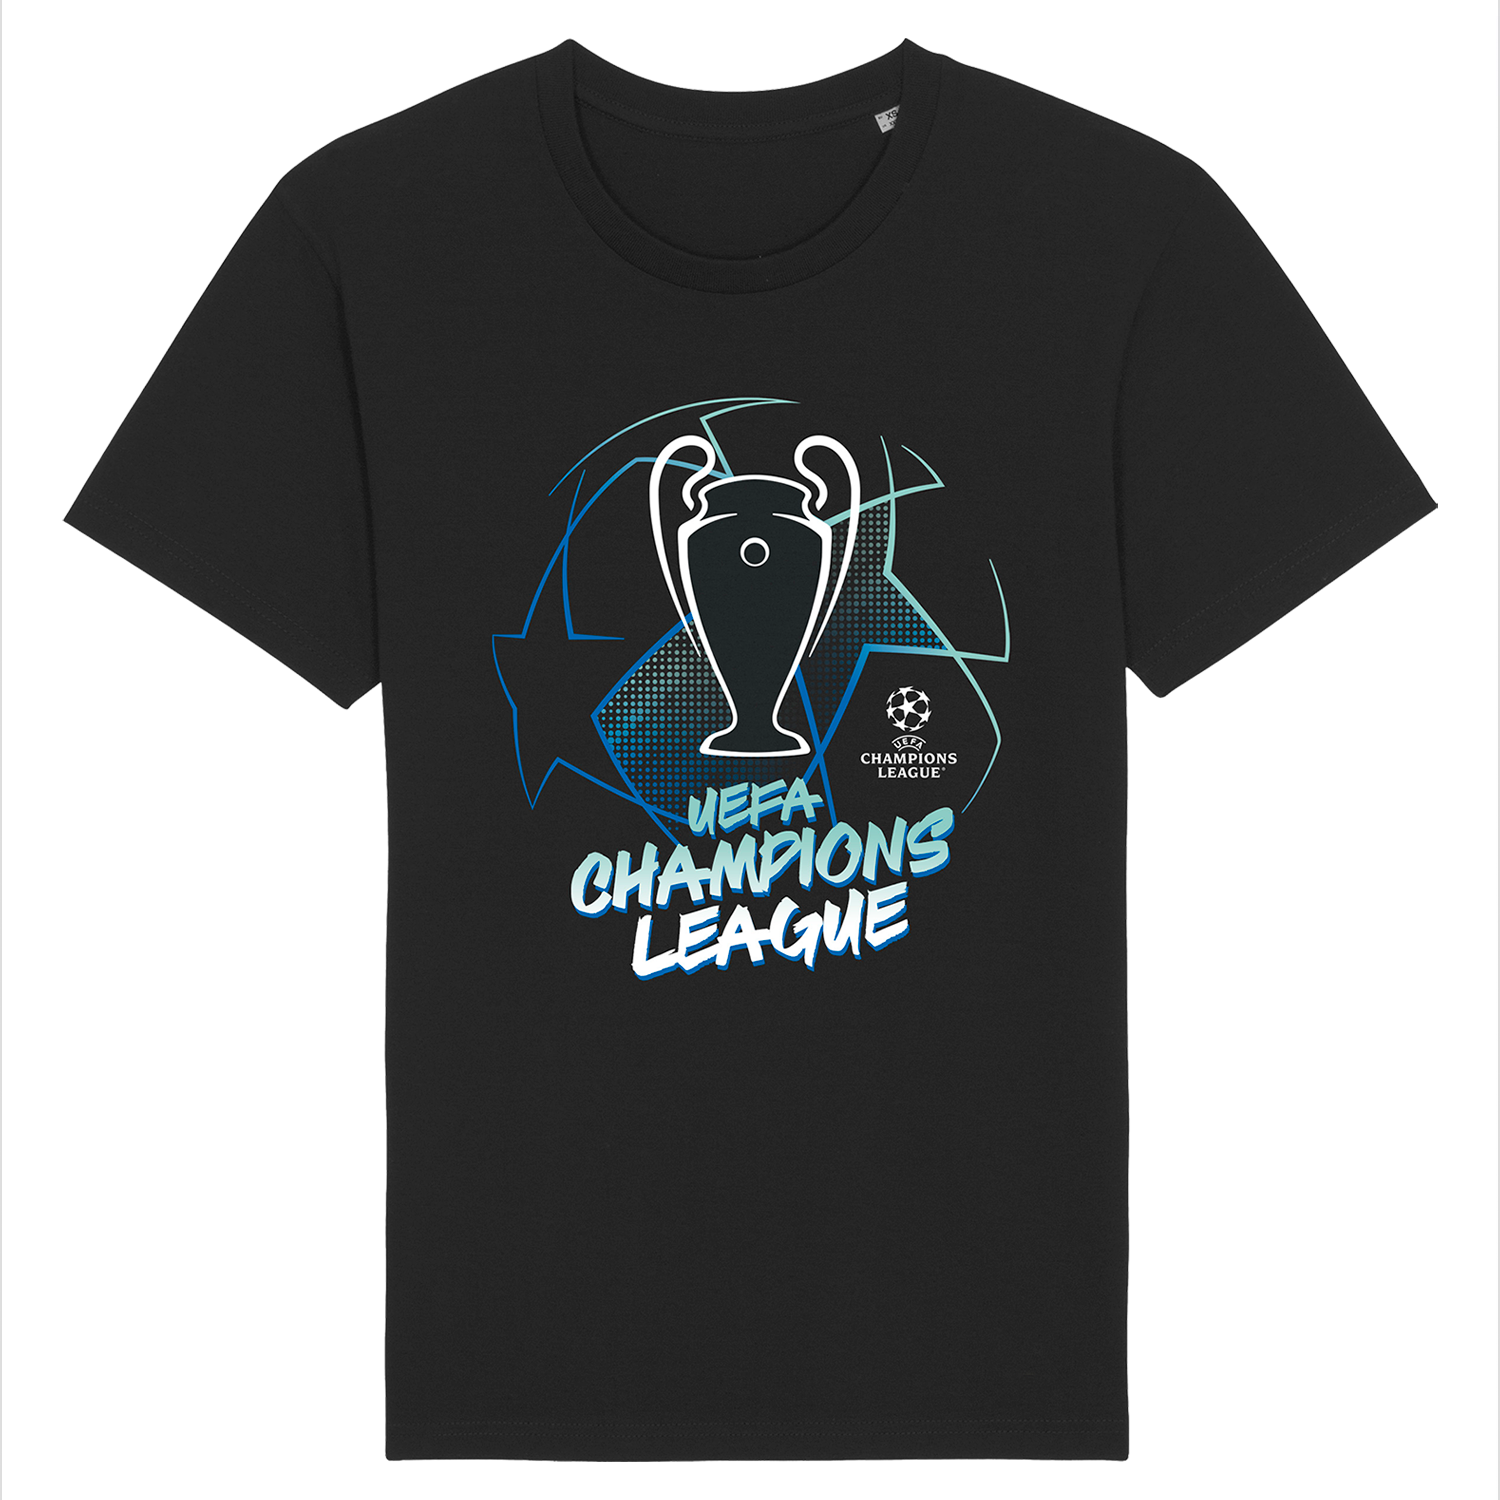 UEFA Champions League - Trophy Starball Black T-Shirt UEFA Club Competitions Online Store